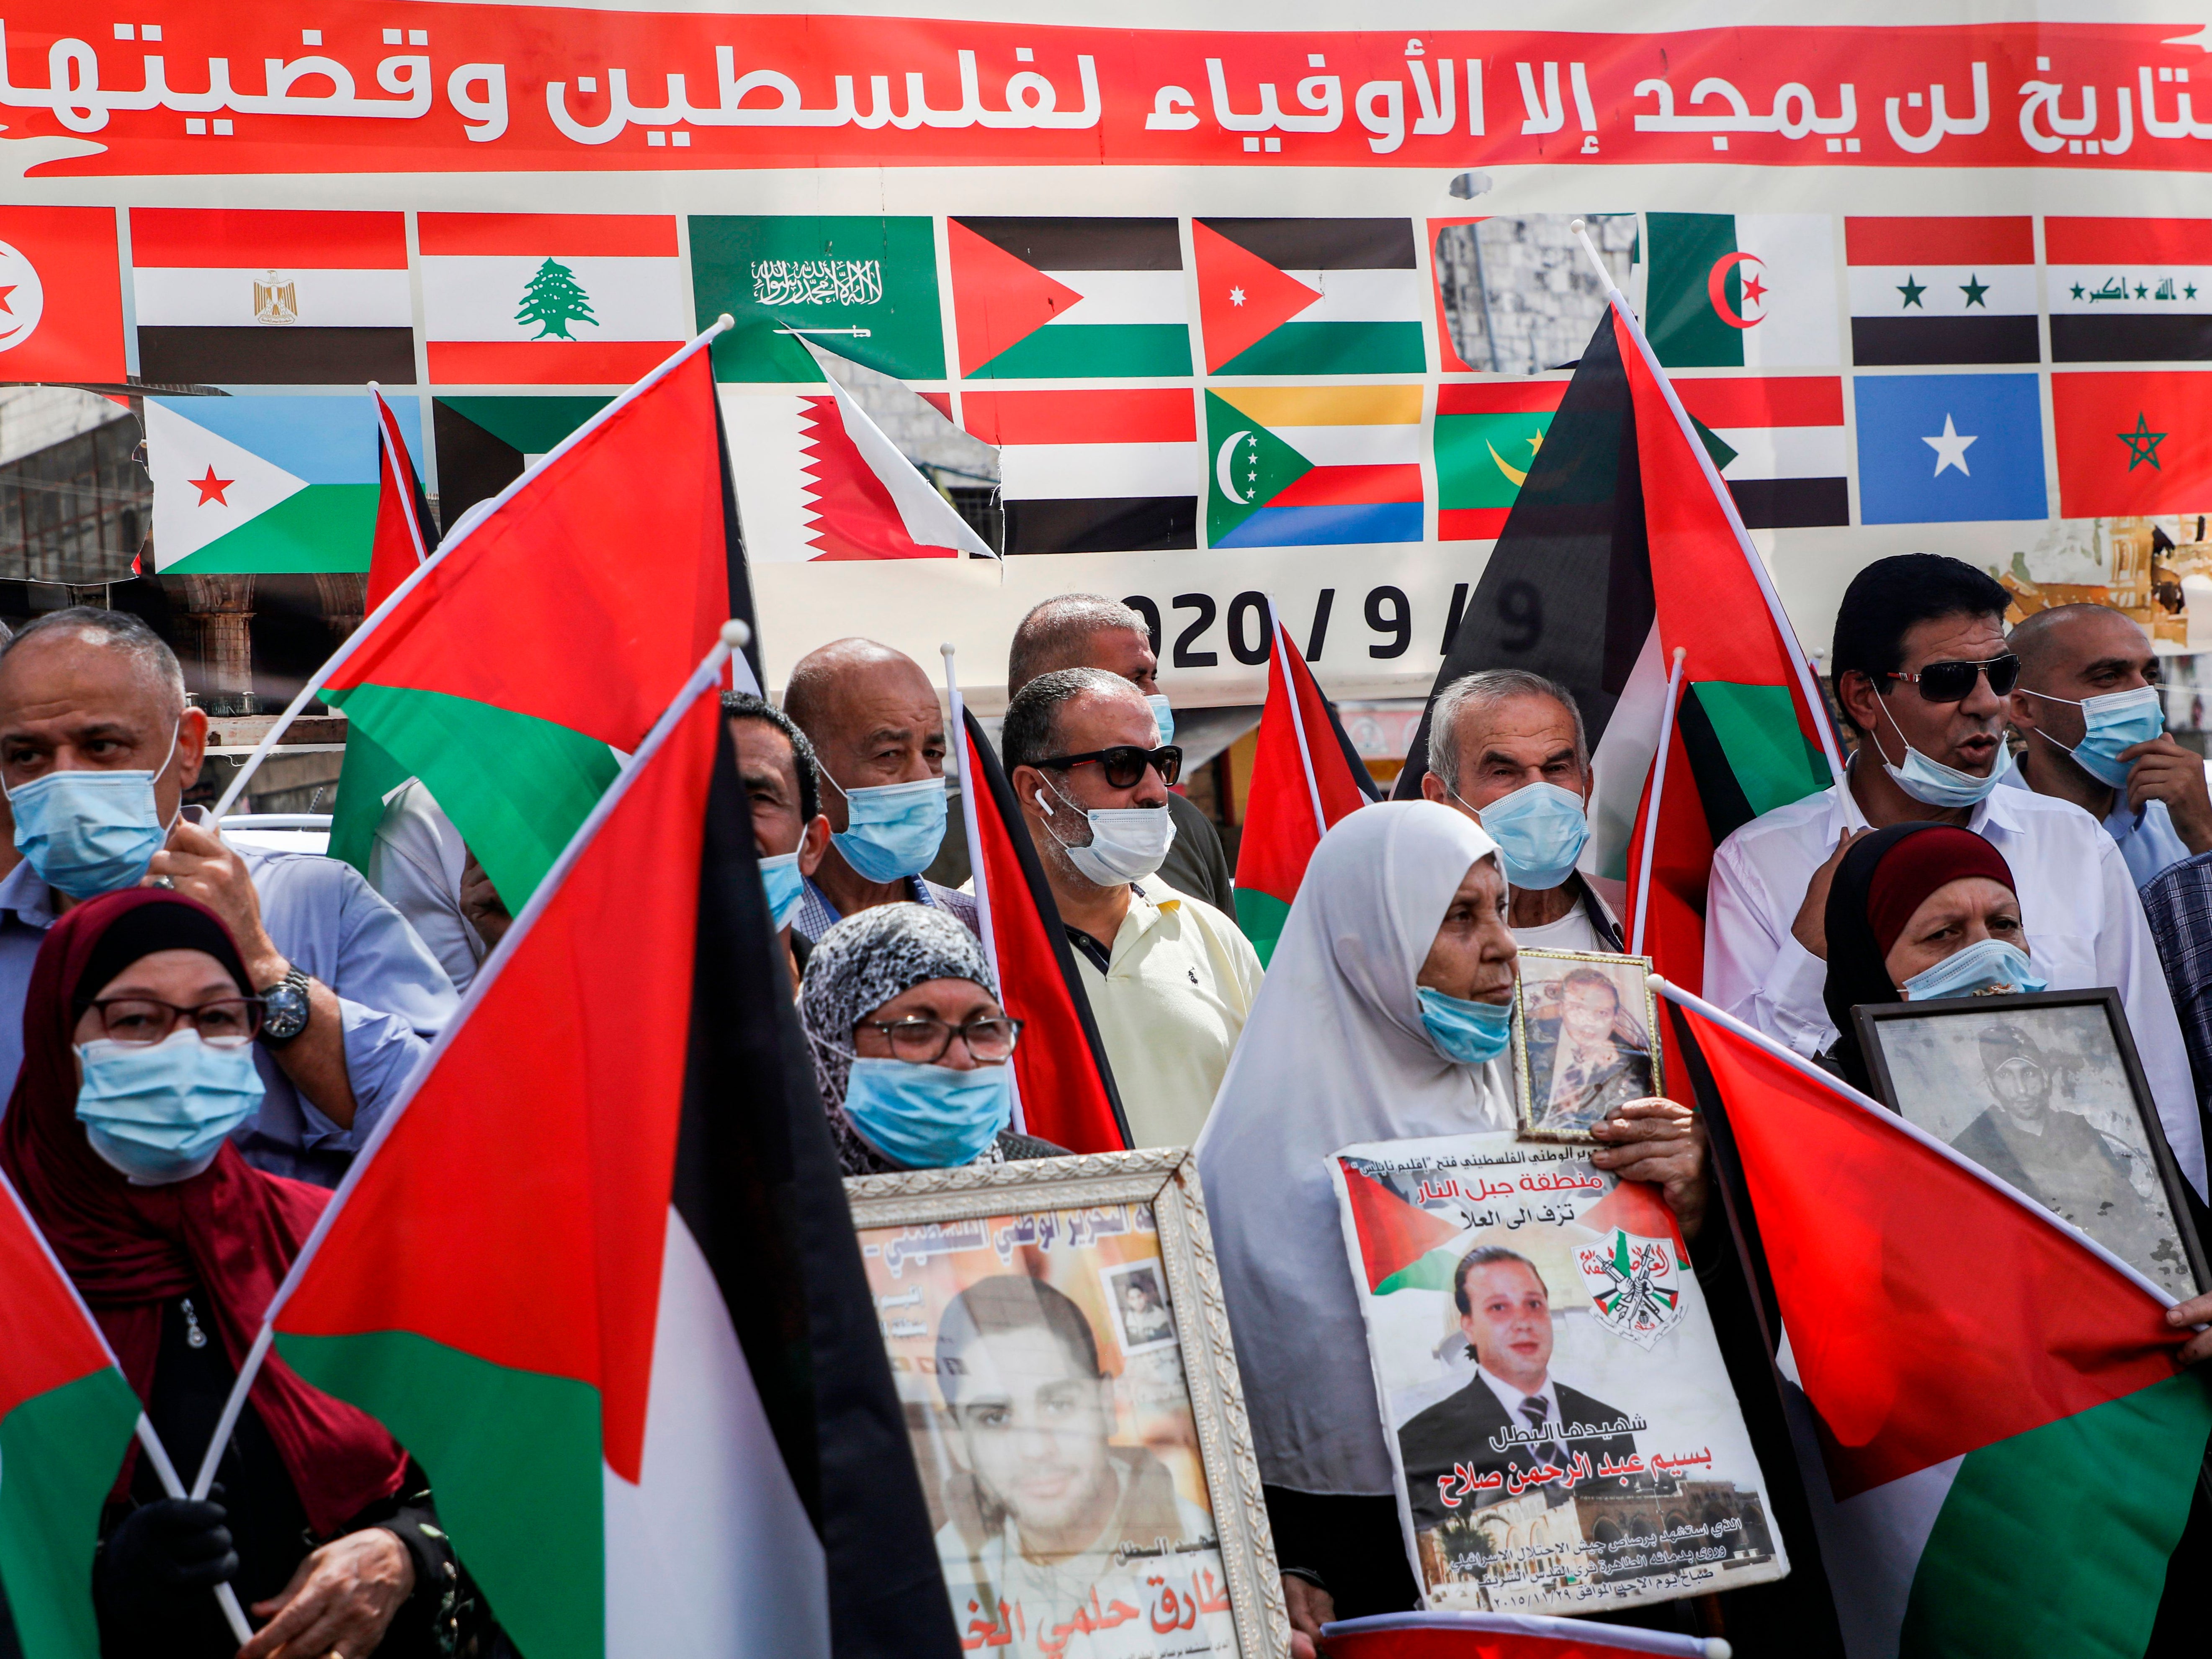 Demonstrators with Palestinian flags stand before a banner showing the flags of Arab League member states with text in Arabic above reading: 'History will glorify but those faithful to Palestine and its cause'